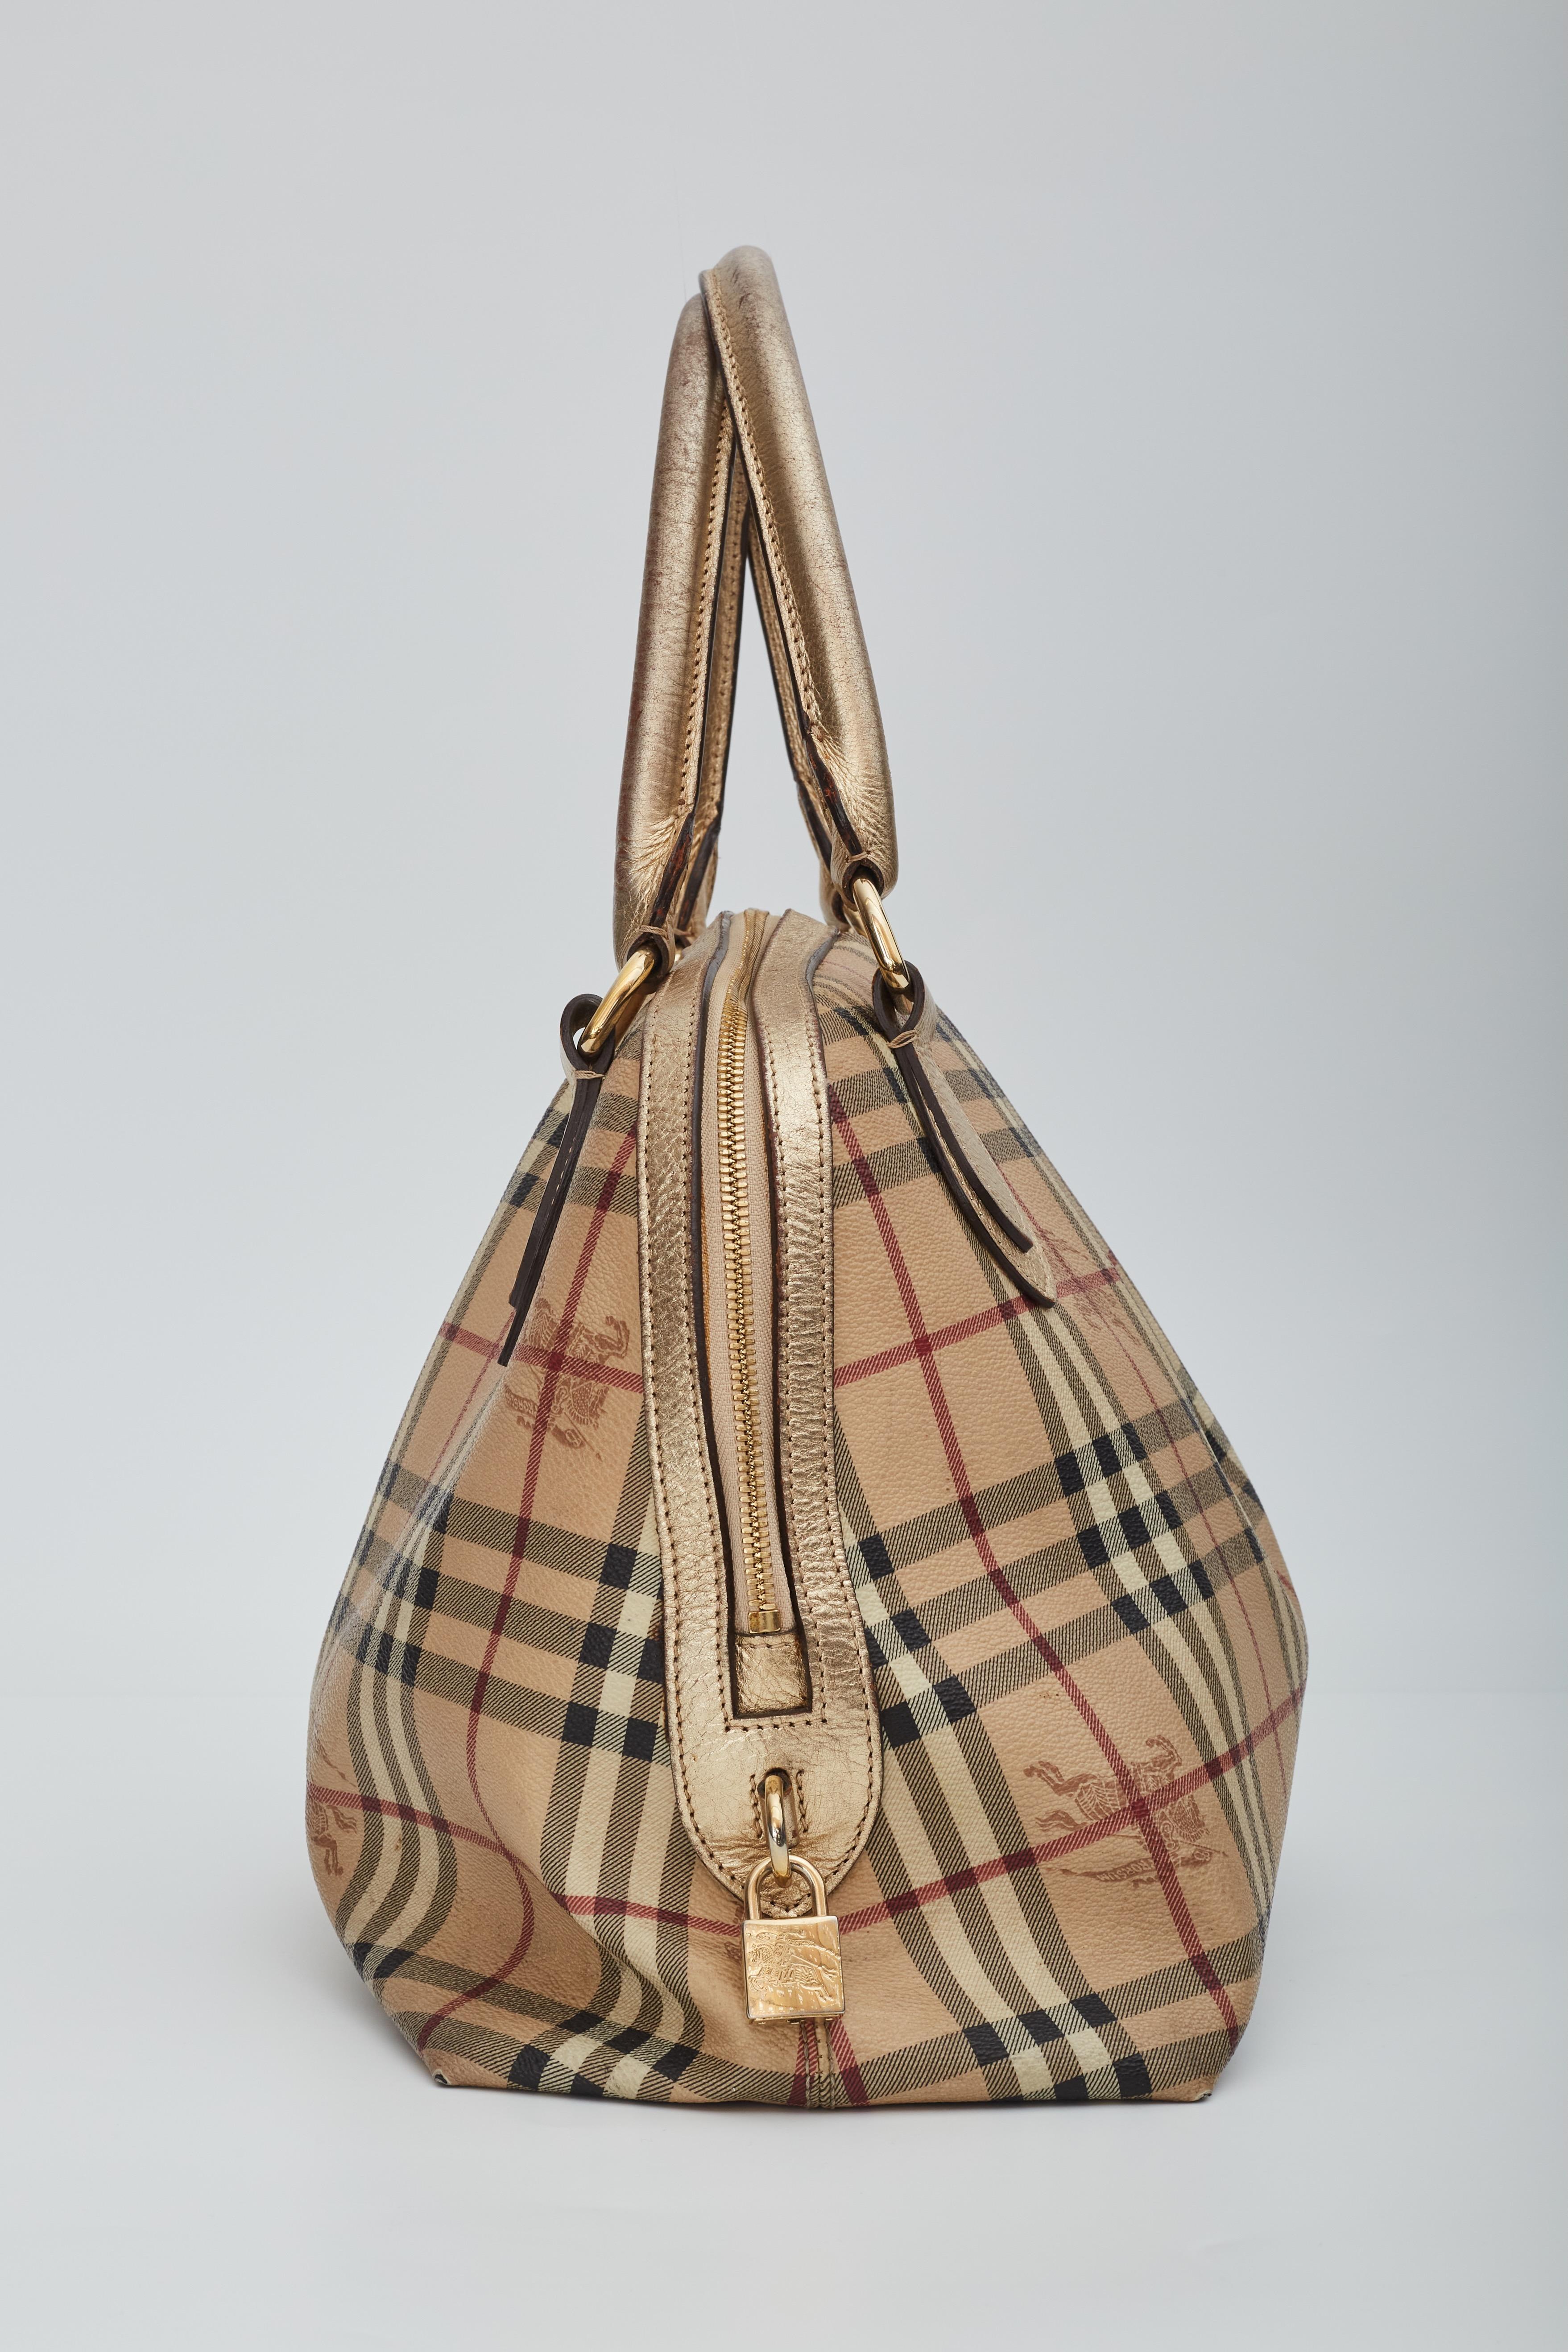 Burberry Haymarket Check Metallic Handle Thornley Bowling Bag In Good Condition For Sale In Montreal, Quebec